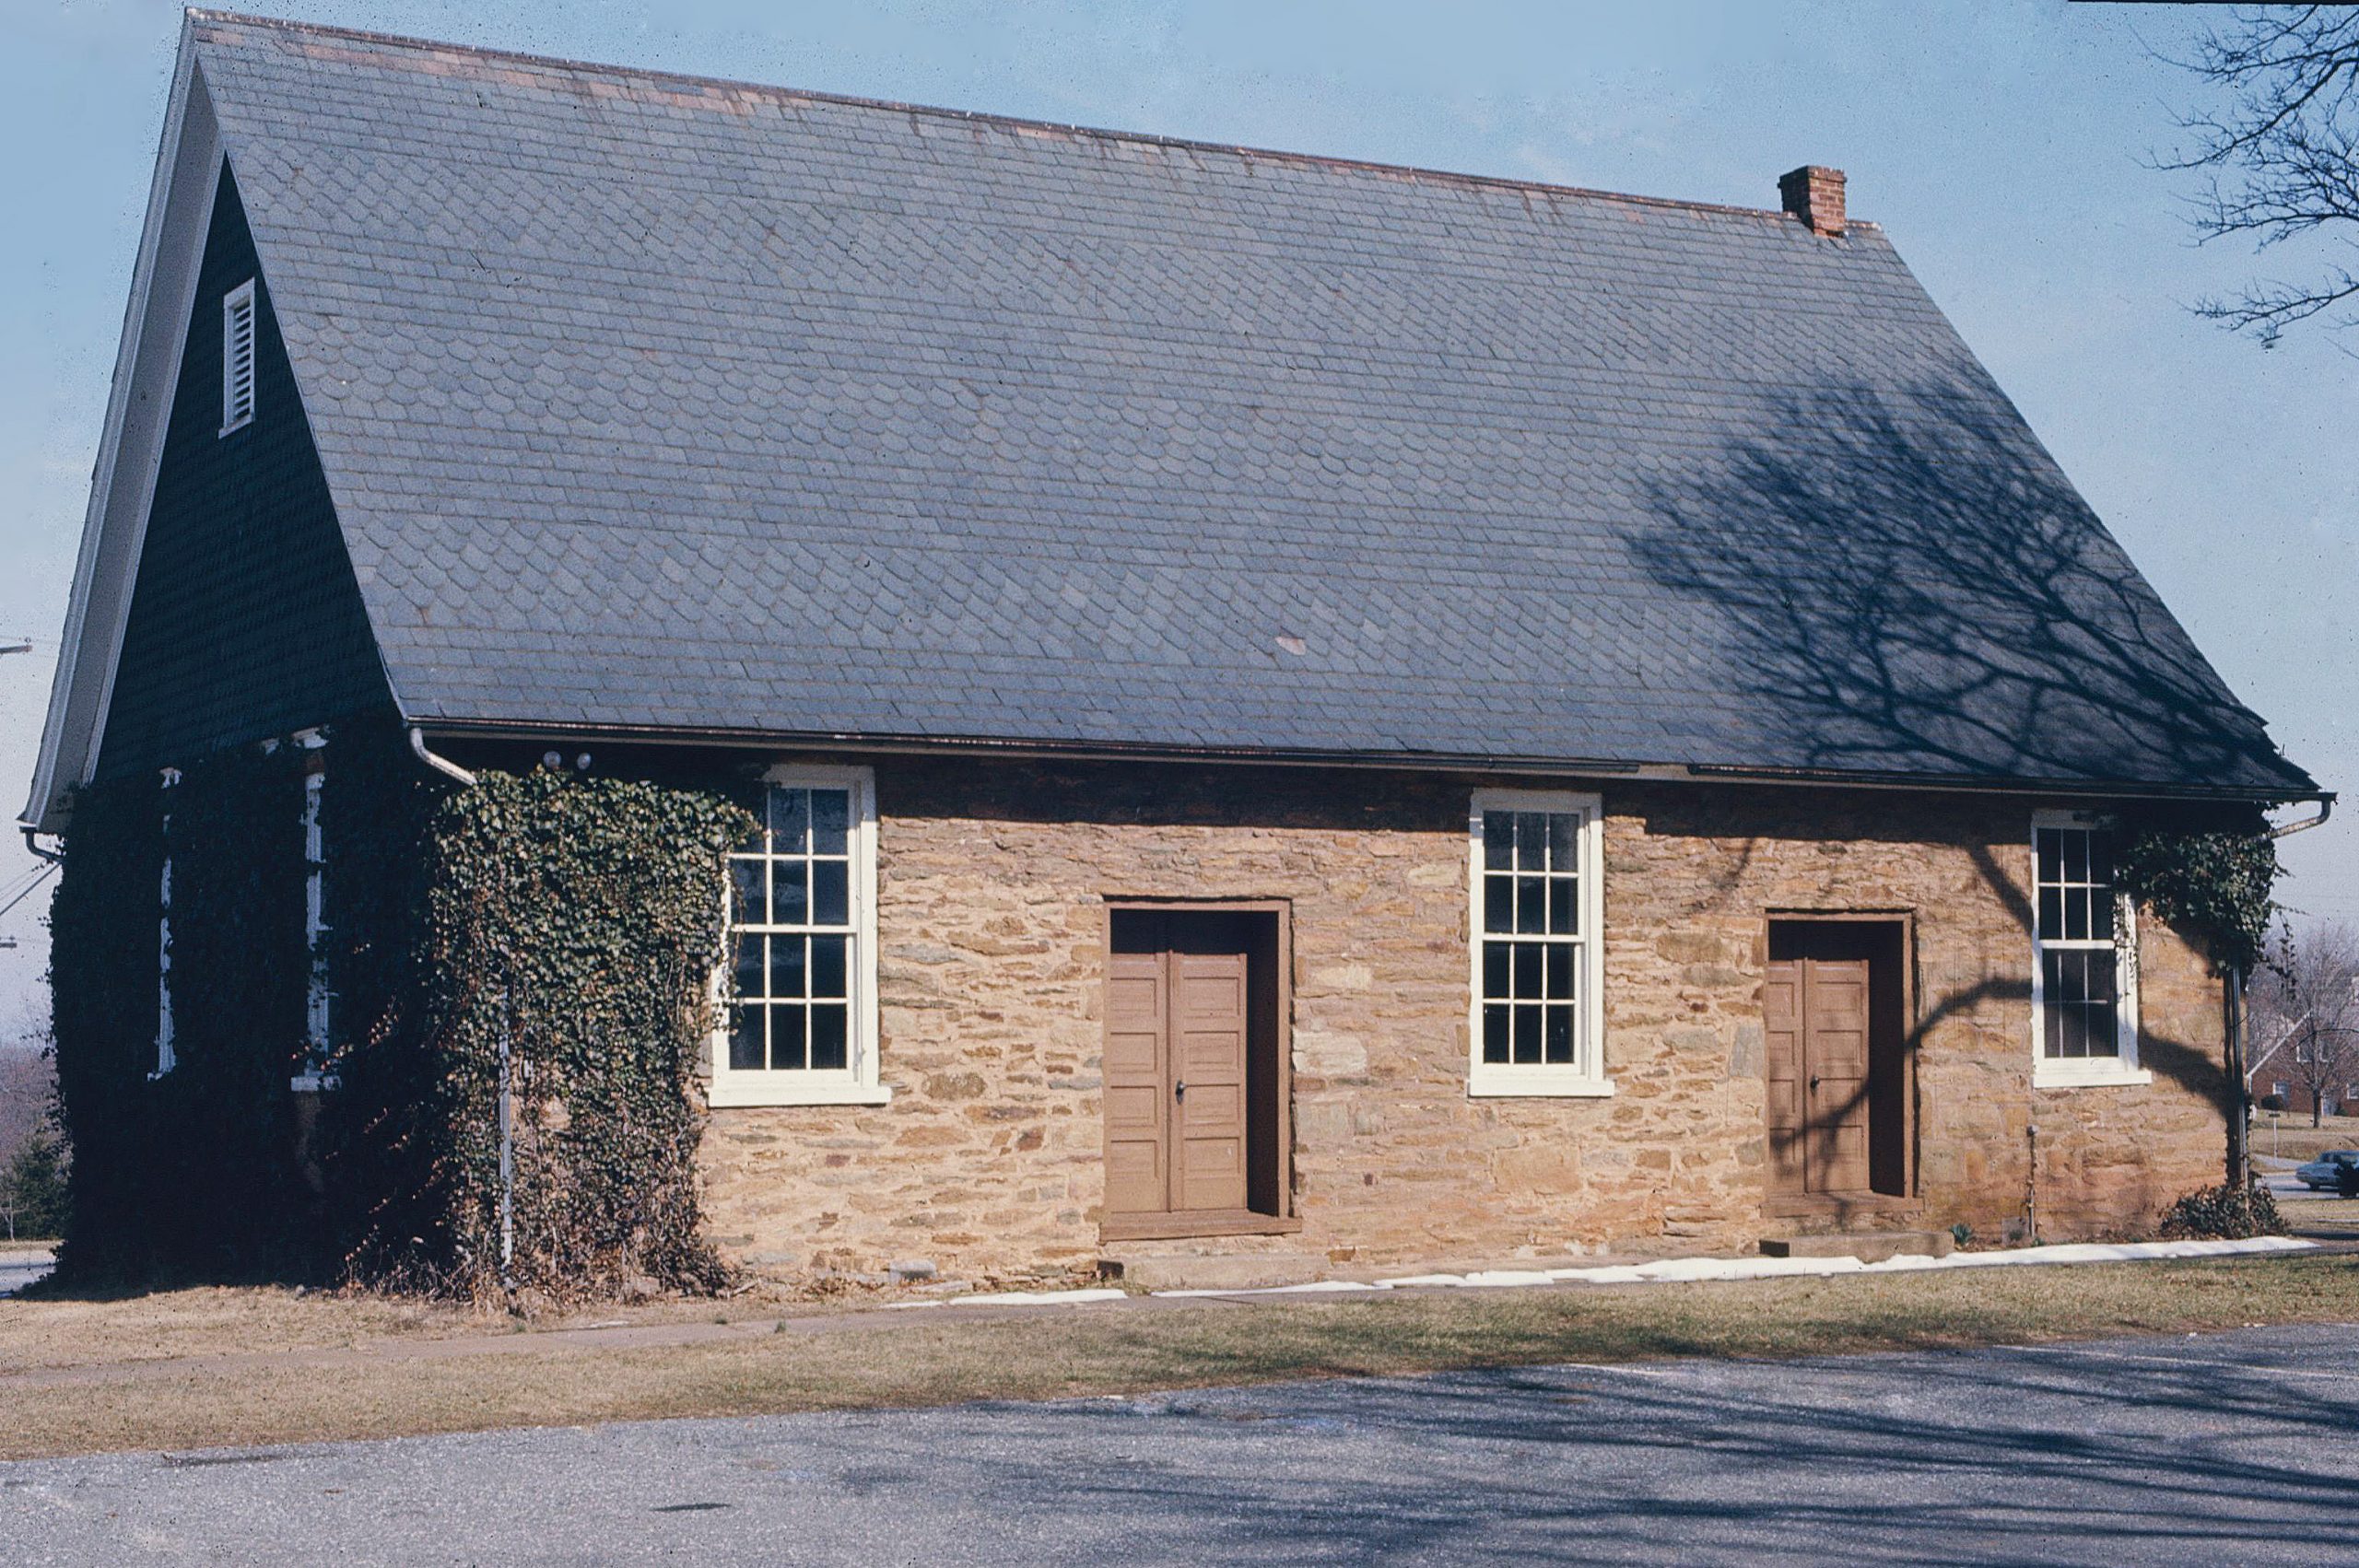 118-0015_Quaker_Meeting_House_1975_Ext_Front_Elevation_VLR_Online-scaled